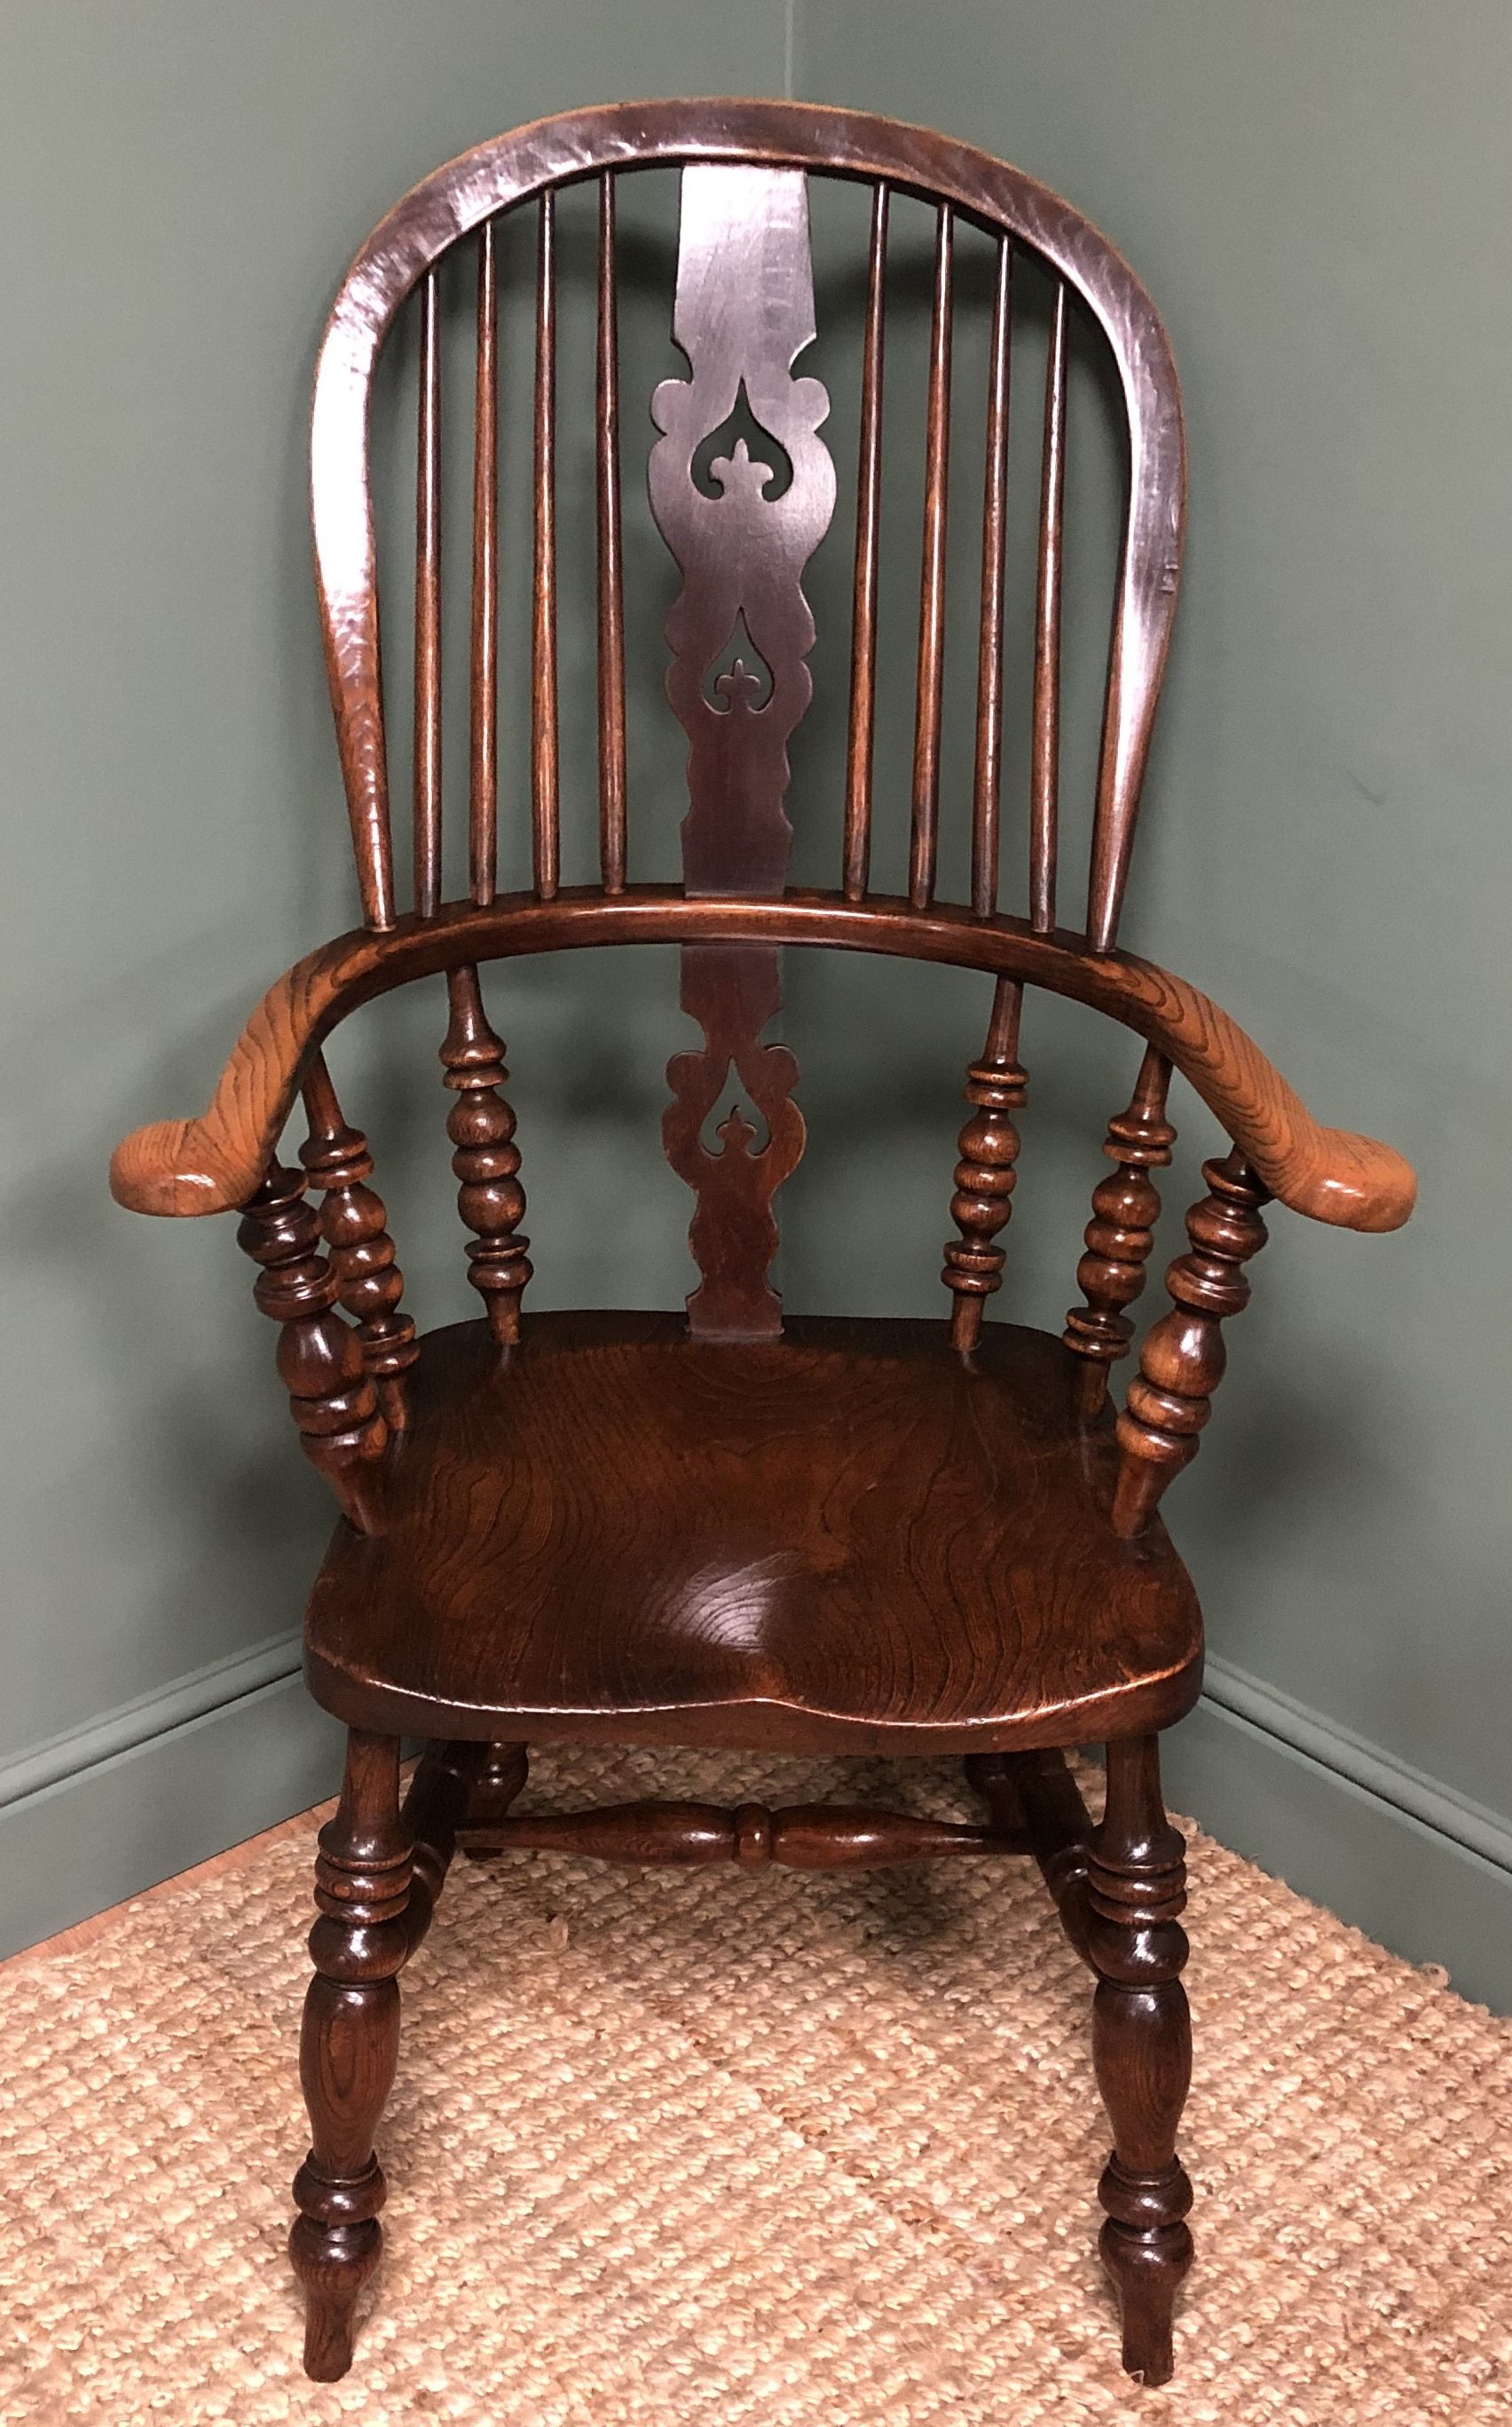 Windsor chair cleaned and waxed